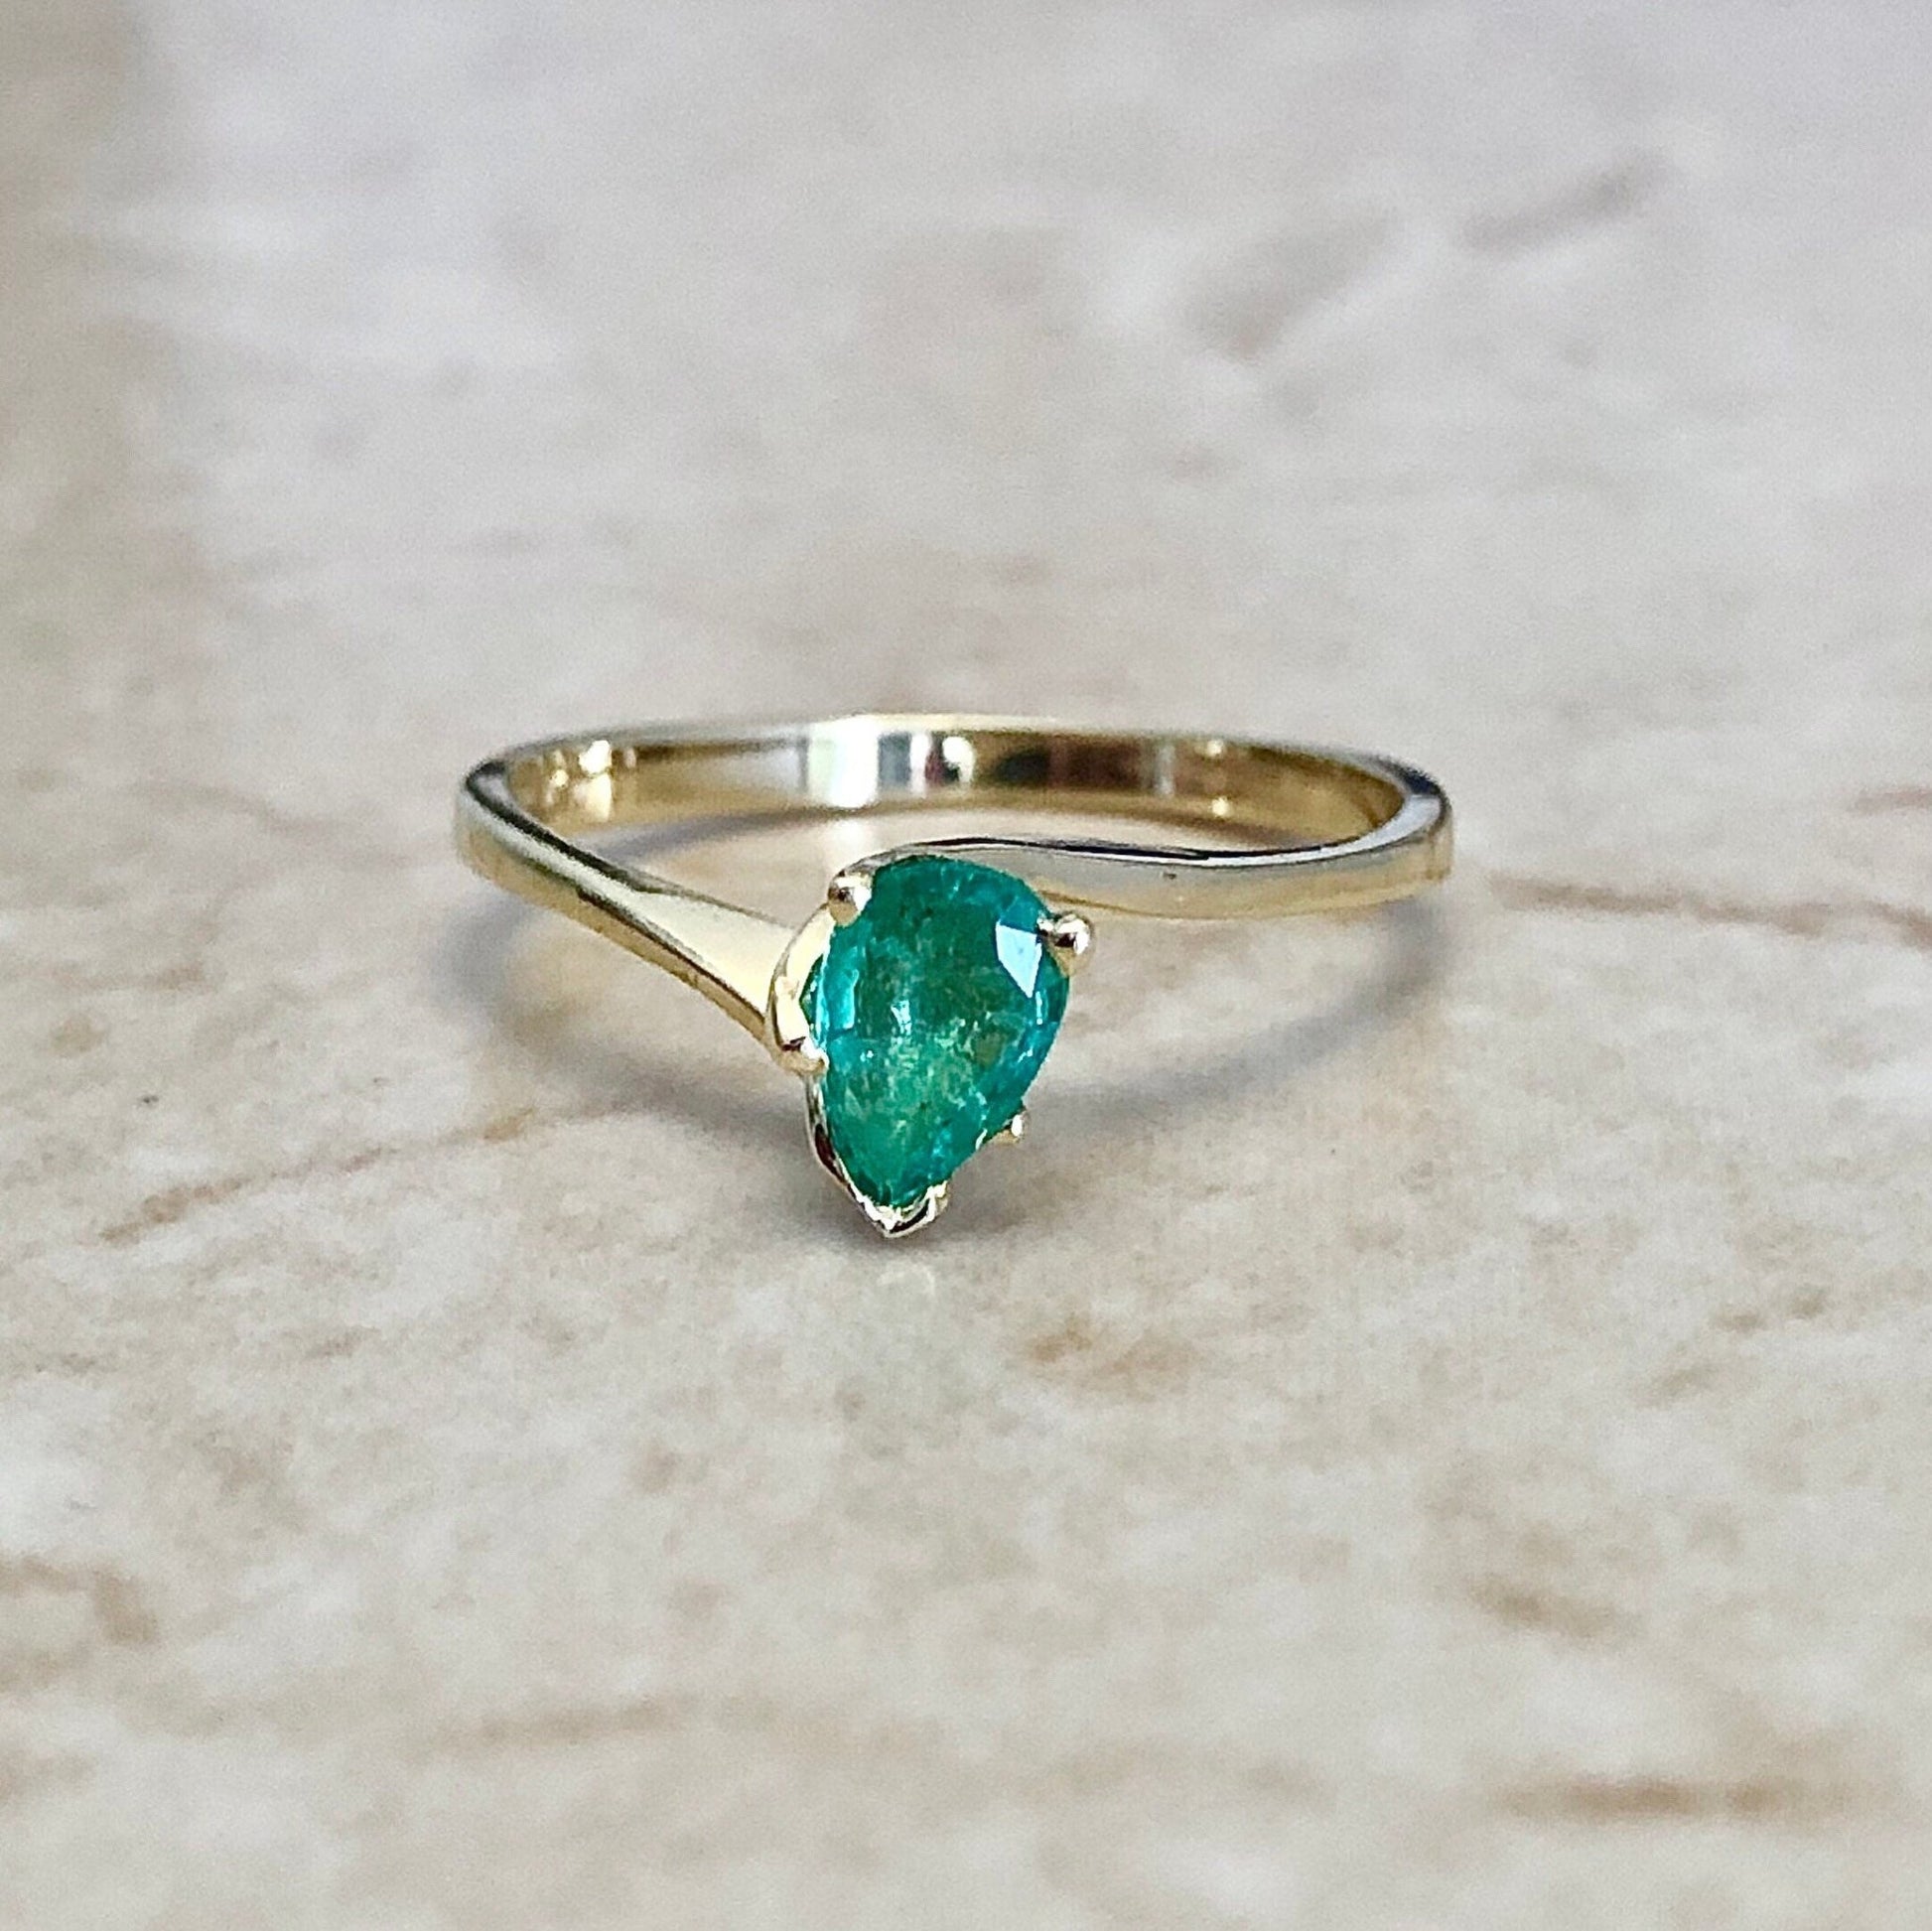 Vintage 14 Karat Yellow Gold Natural Emerald Solitaire Ring - Emerald Cocktail Ring - Engagement Ring - Size 6 US - May Birthstone